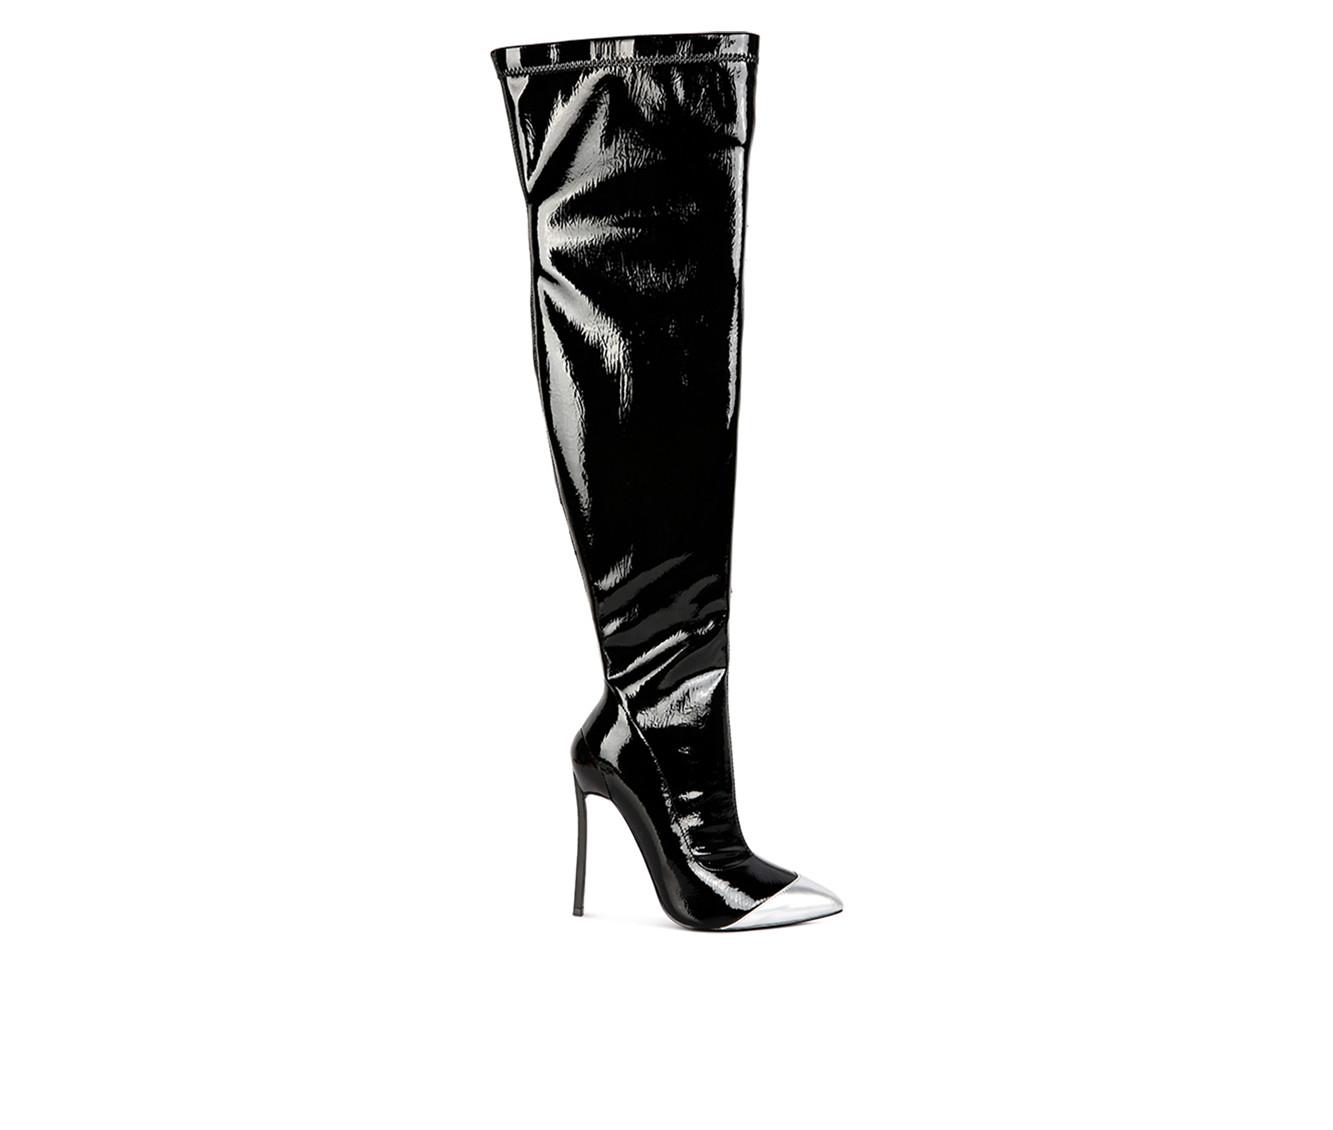 Women's London Rag Chimes Over The Knee Stiletto Boots